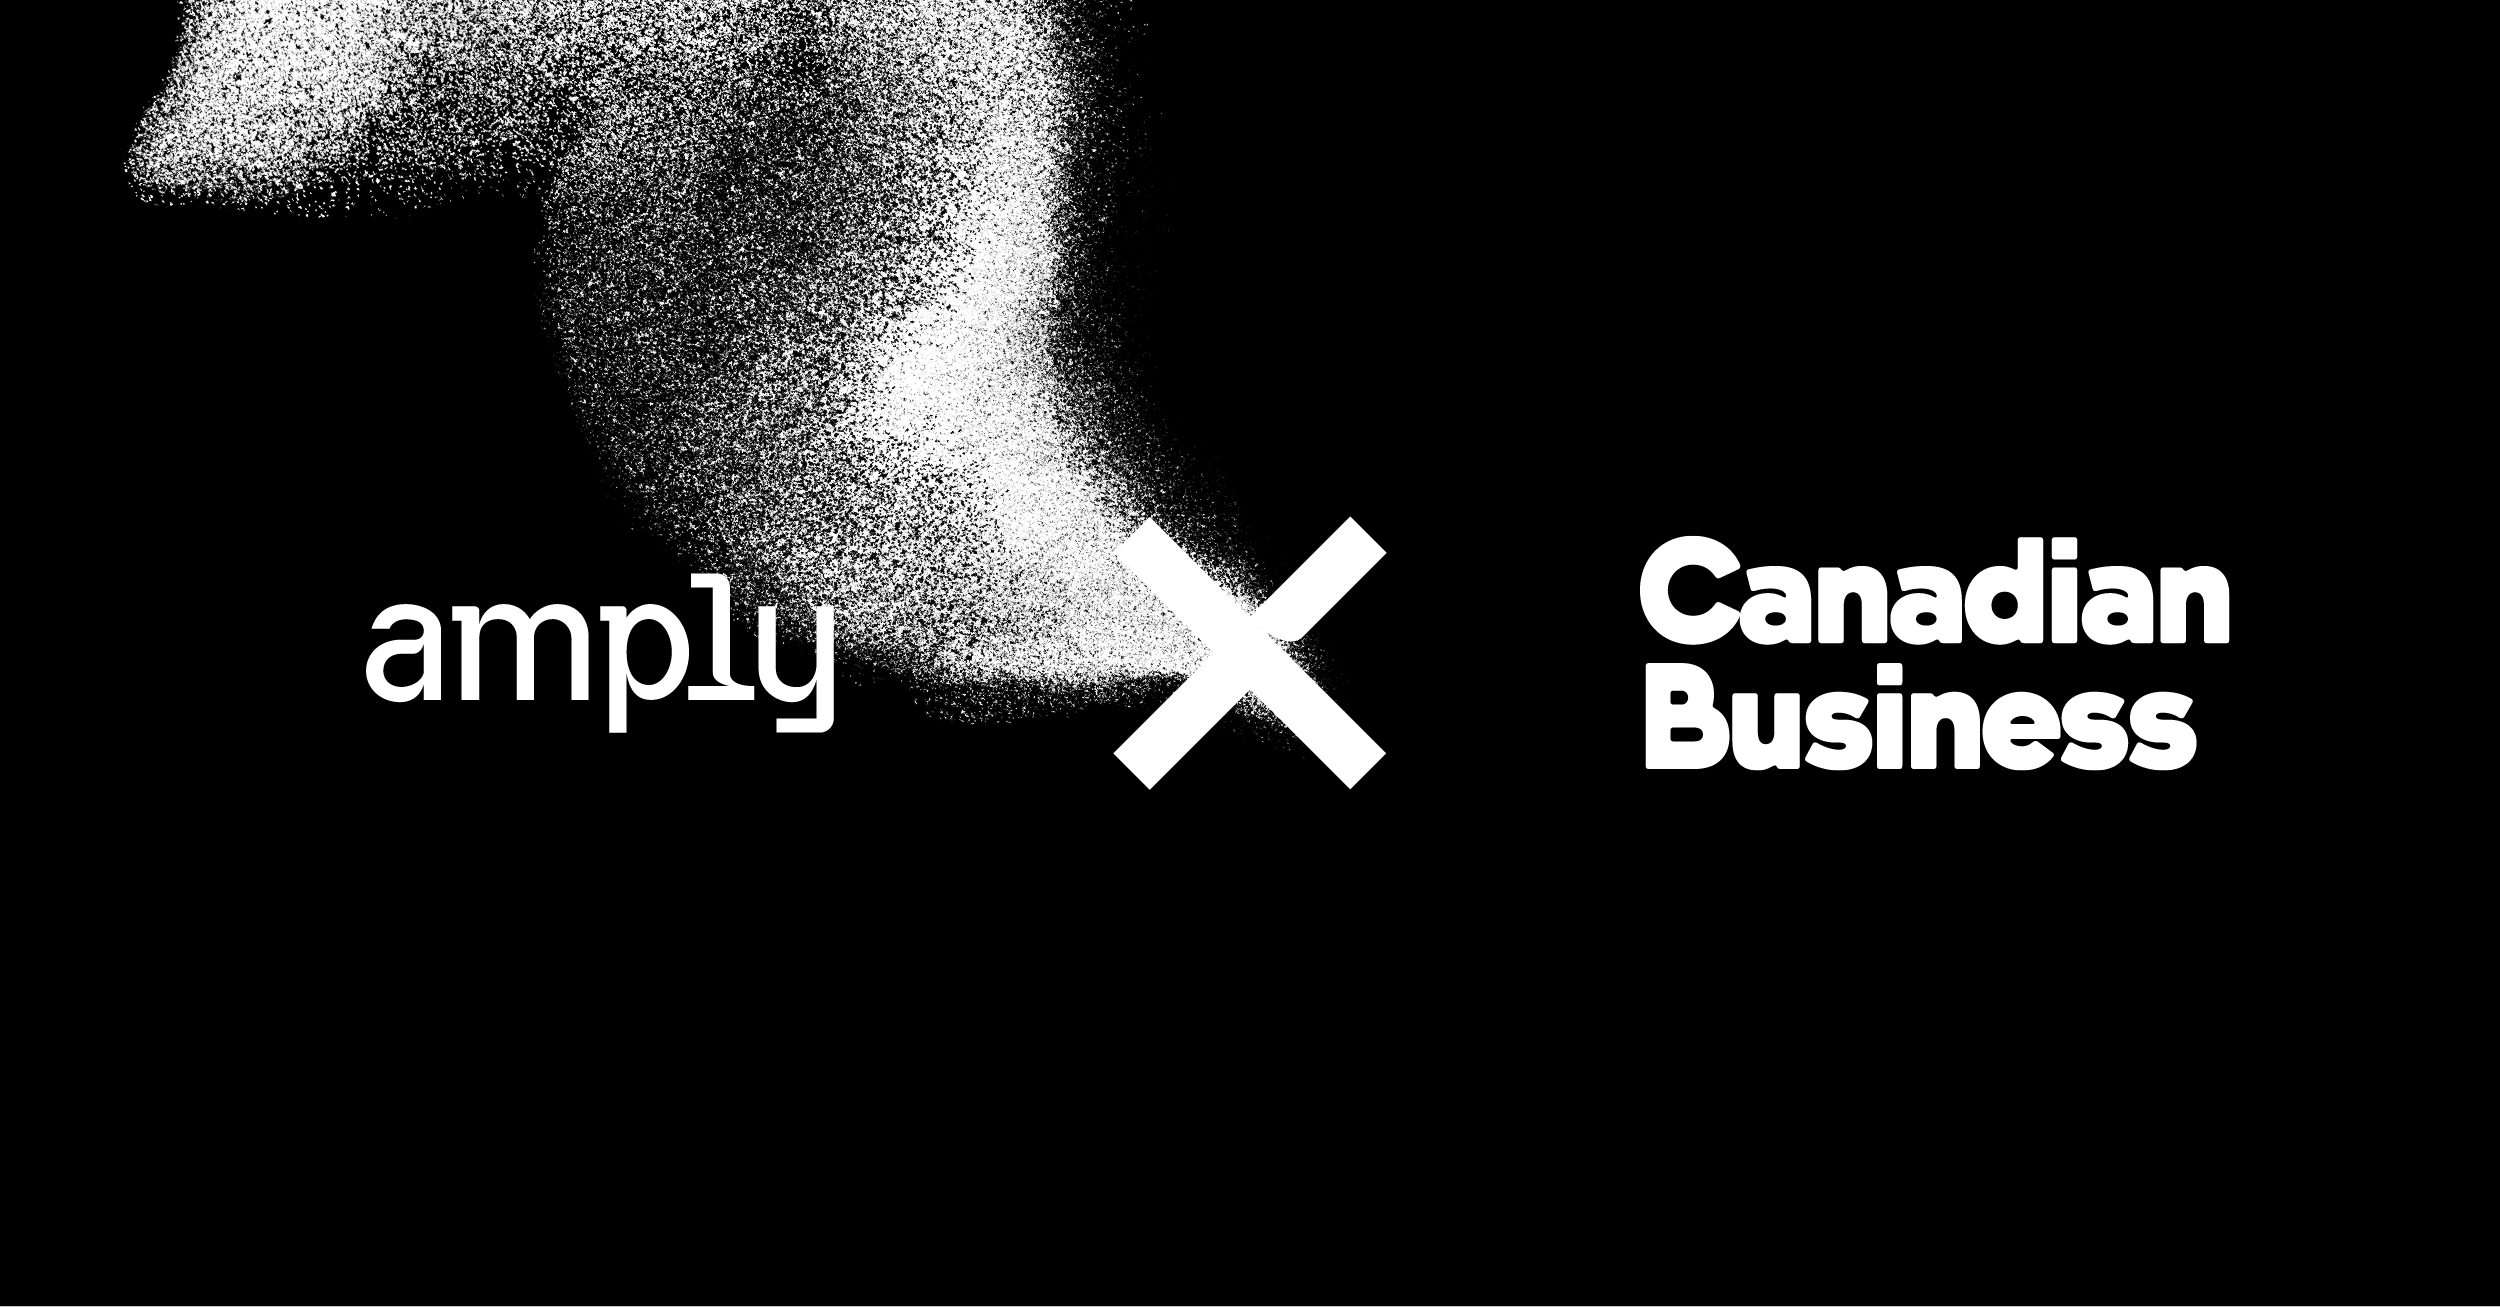 Amply and Canadian Business logos on a black background. between the logos is an X denoting the collaboration. The X has an abstract hazy/smokey shape coming from it.